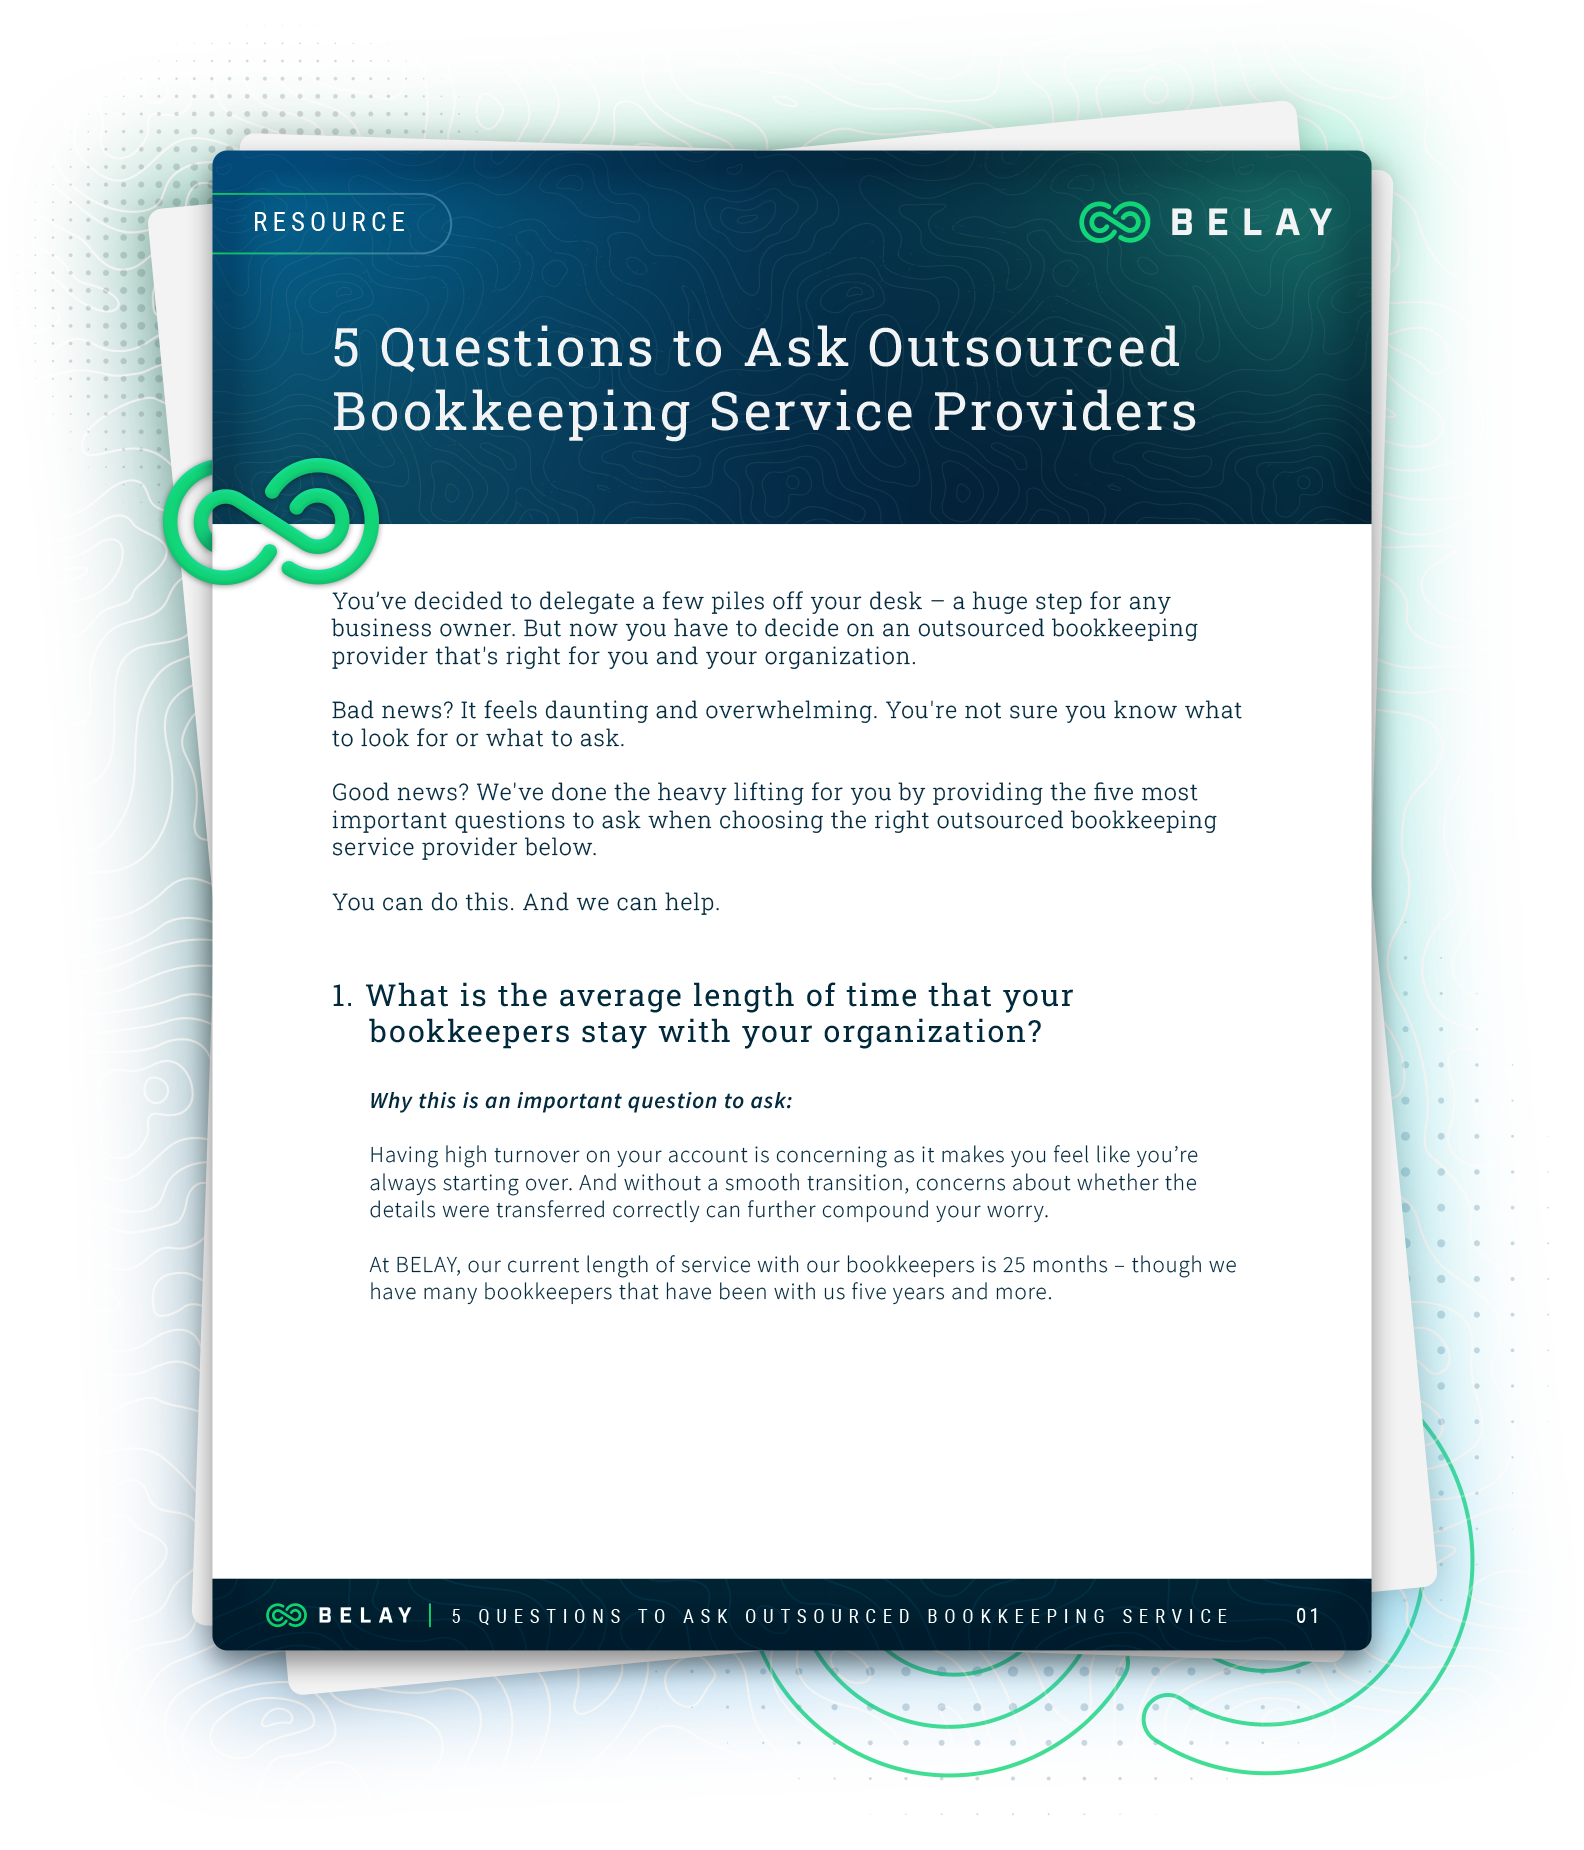 5 Questions to Ask Outsourced Bookkeeping Service Providers